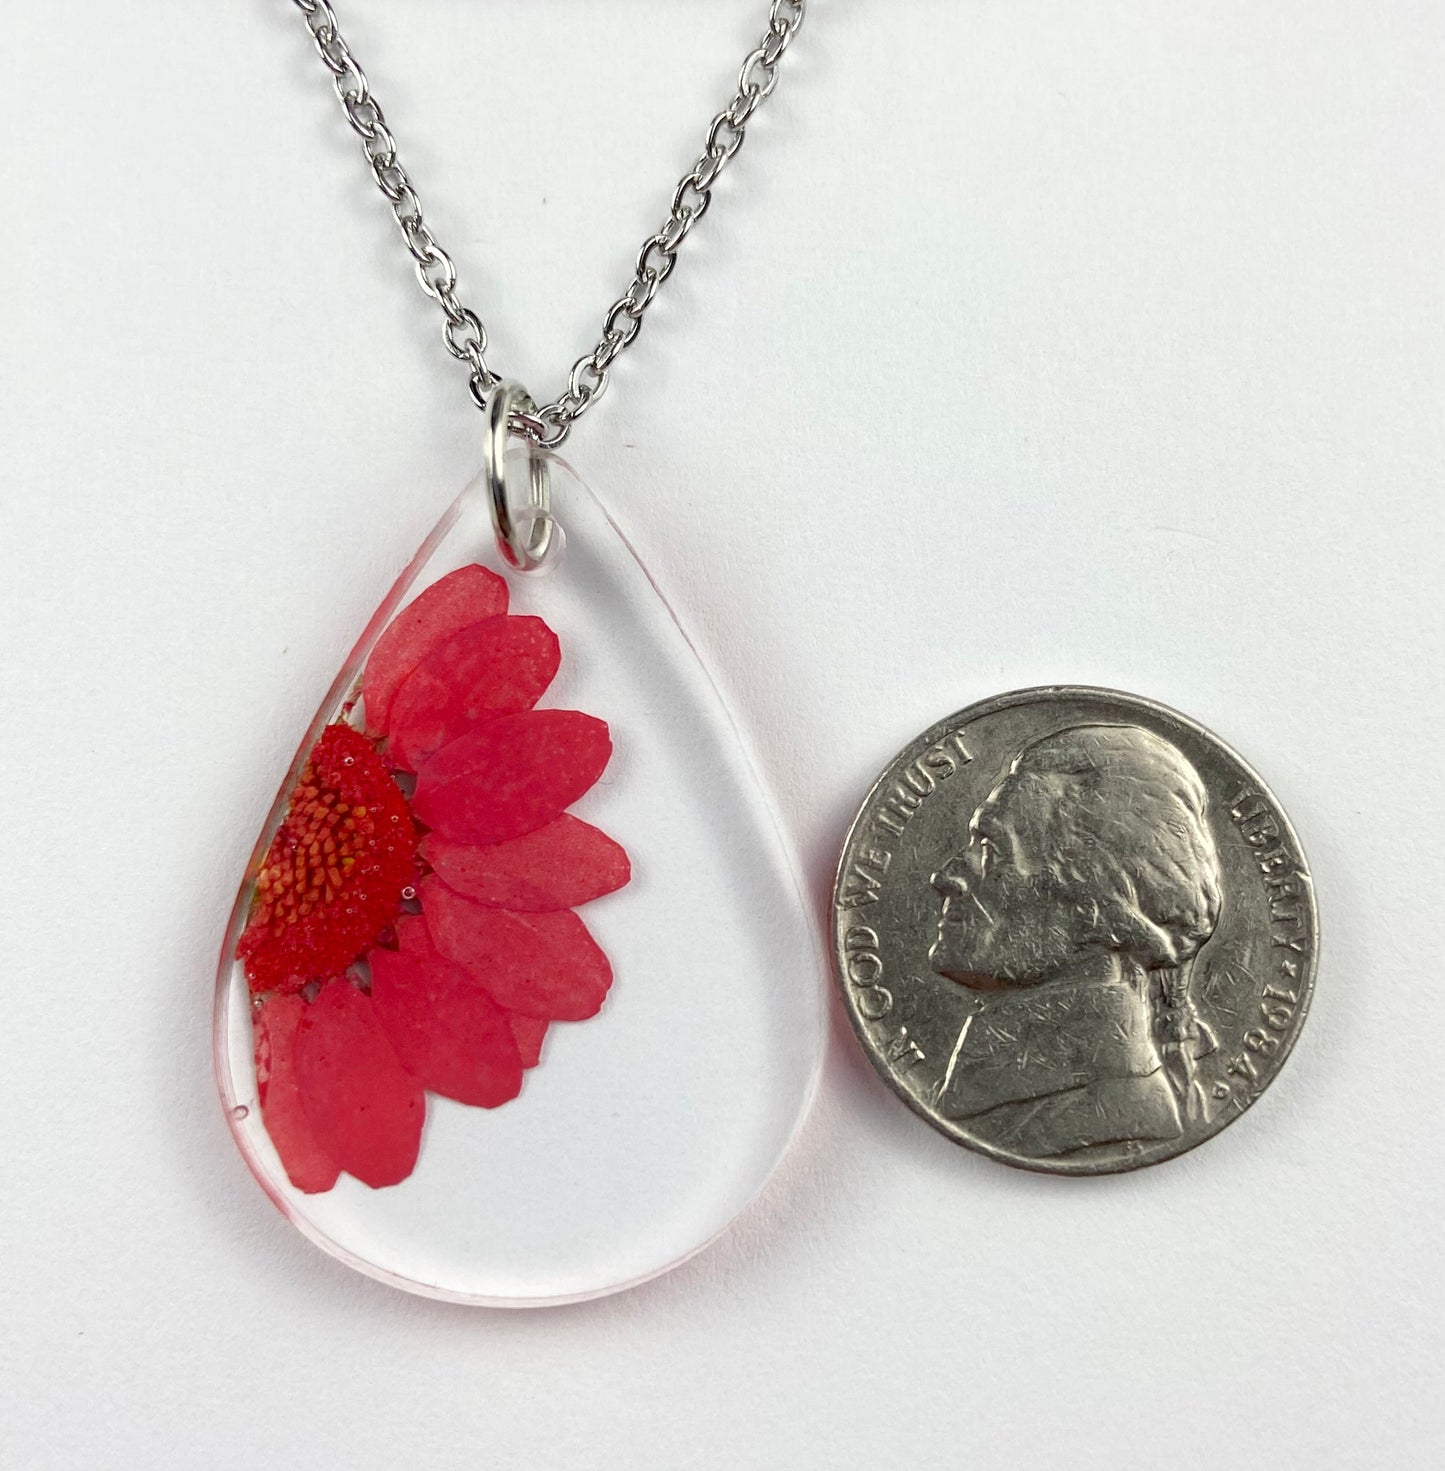 Red Real Flower Daisy Pendant Necklace